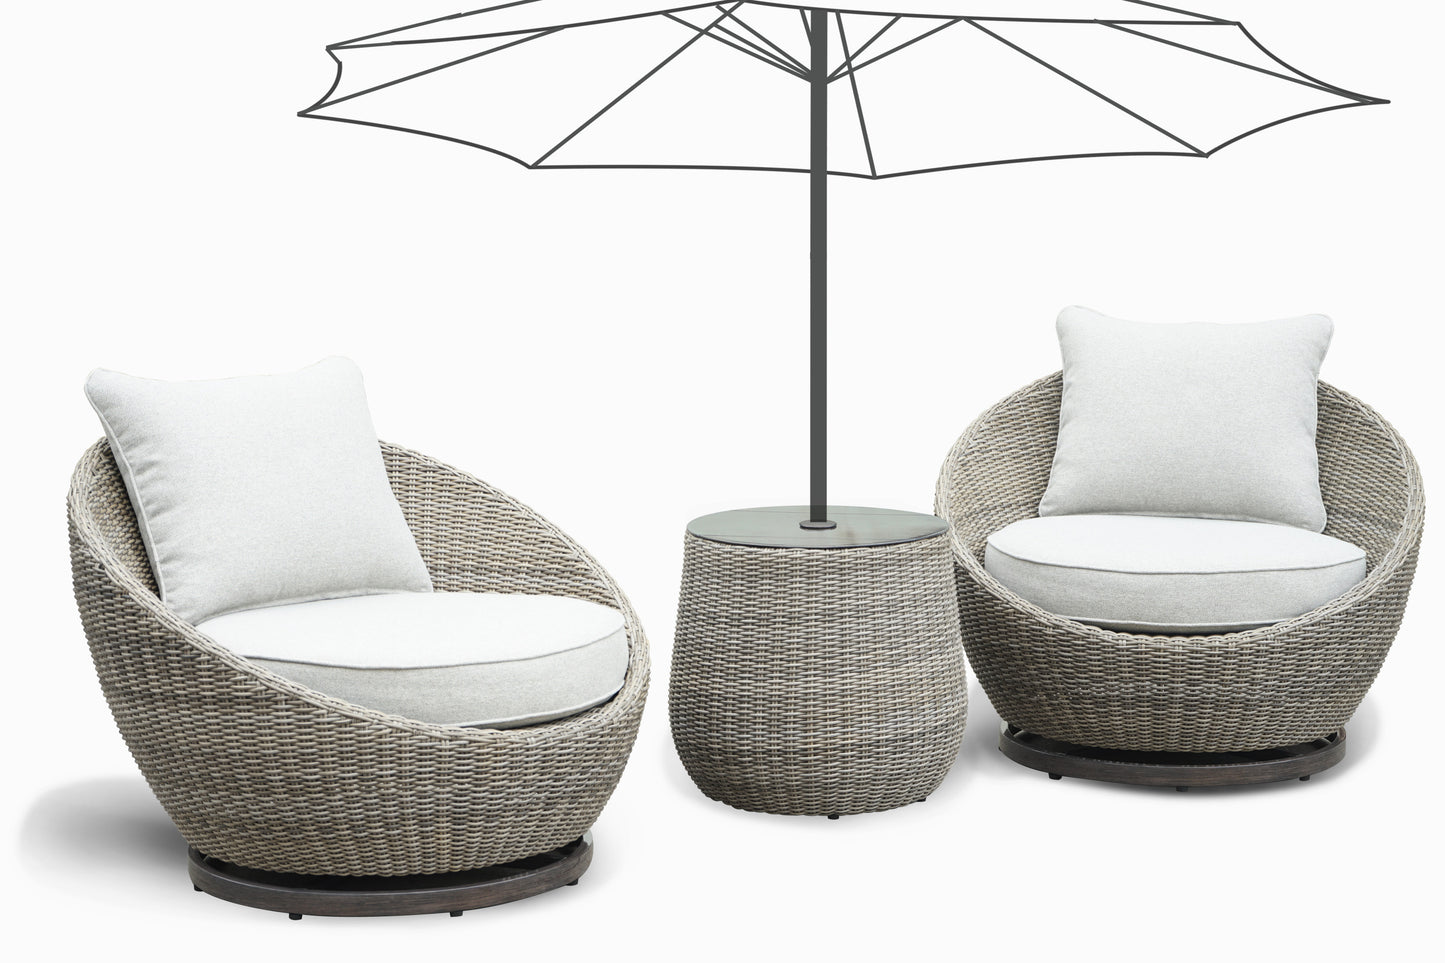 Cozy Outdoor Set - Swivel Woven Chairs, Side Table - All-Weather Resin Wicker, Powder-Coated Aluminum, Fully Assembled